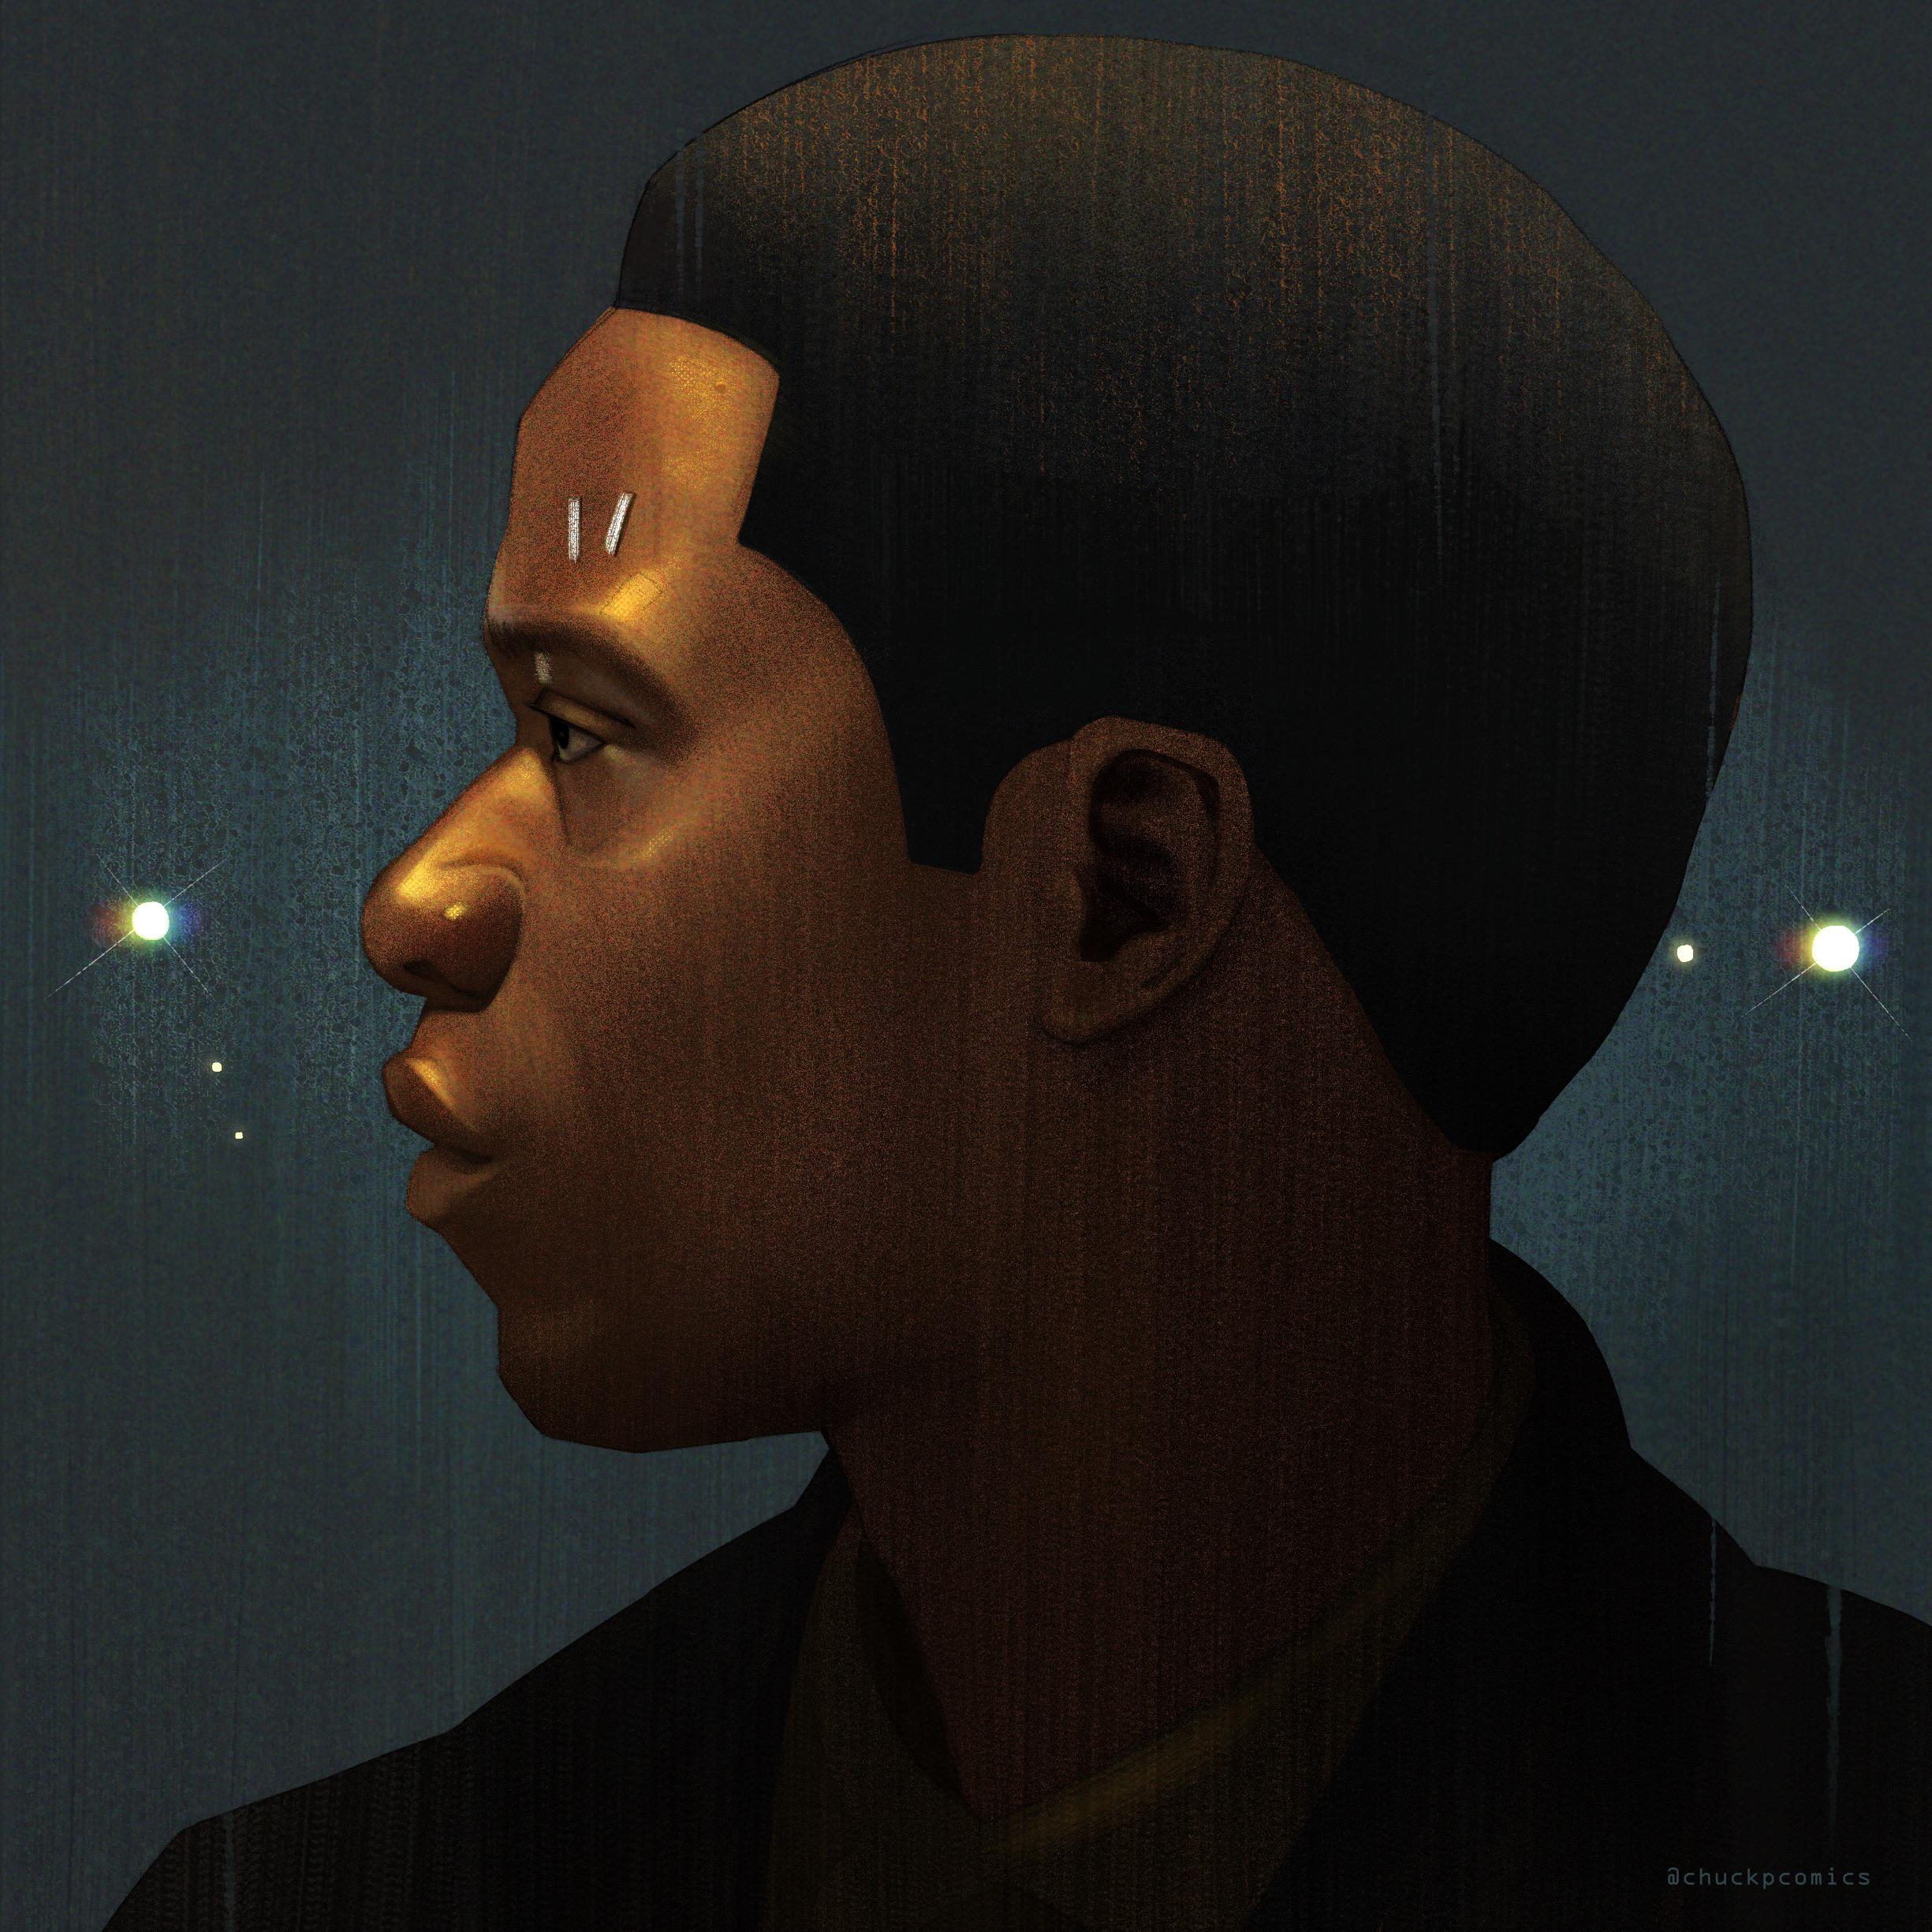 I made this painting of Franklin saint